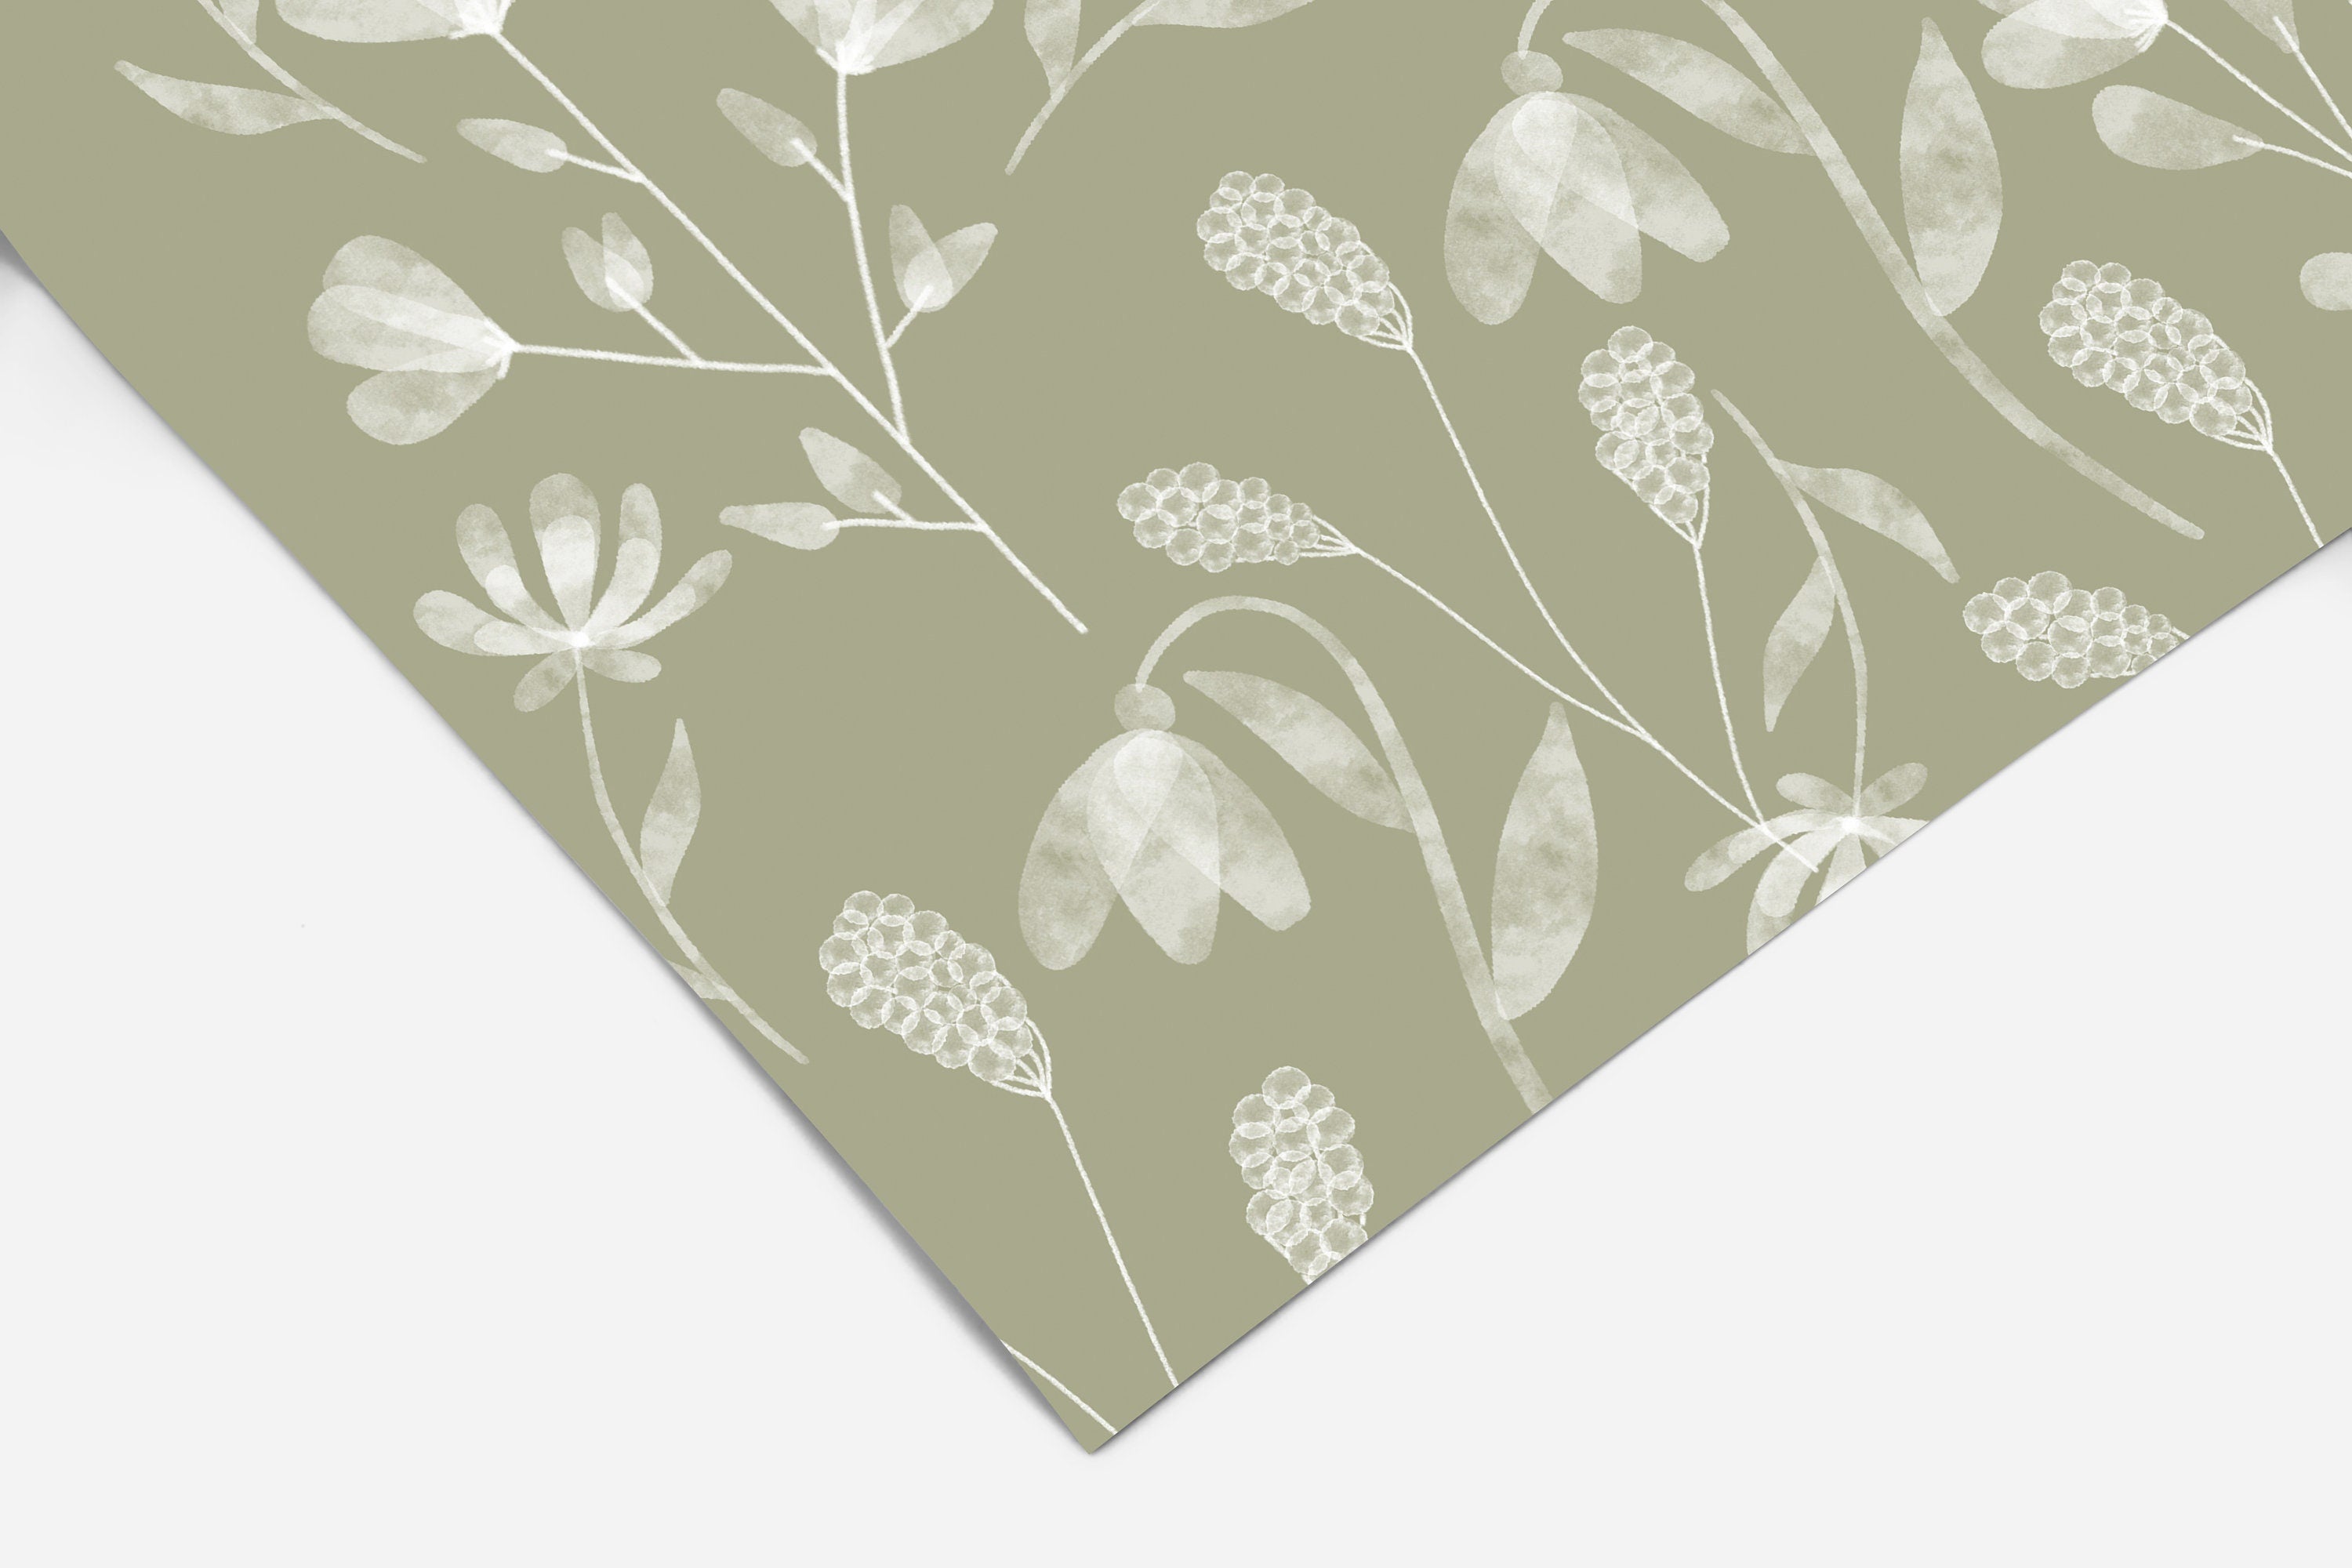 Olive Floral Wallpaper | Adhesive Wallpaper | Wallpaper Peel And Stick | Removable Wallpaper | Wall Paper Peel And Stick | Eco Friendly 2061 - JamesAndColors